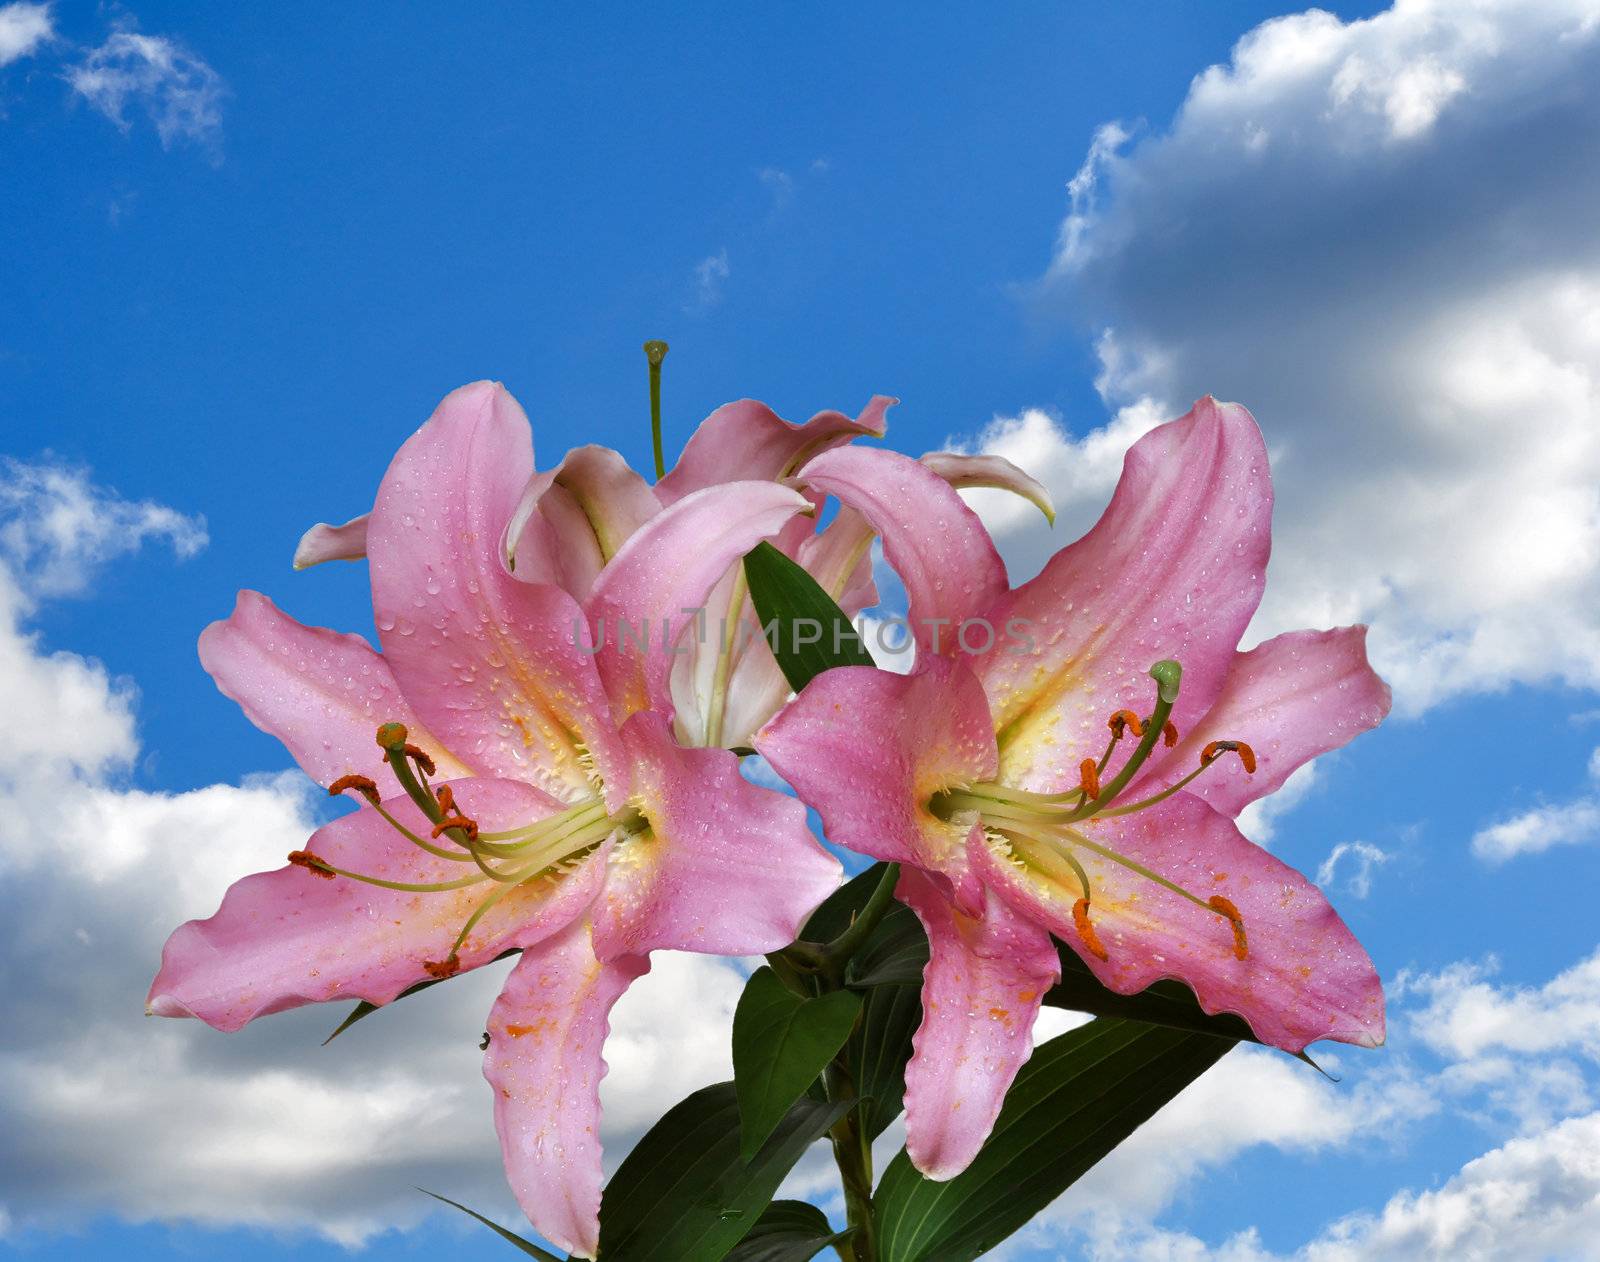 Lily flower against the blue sky with clouds